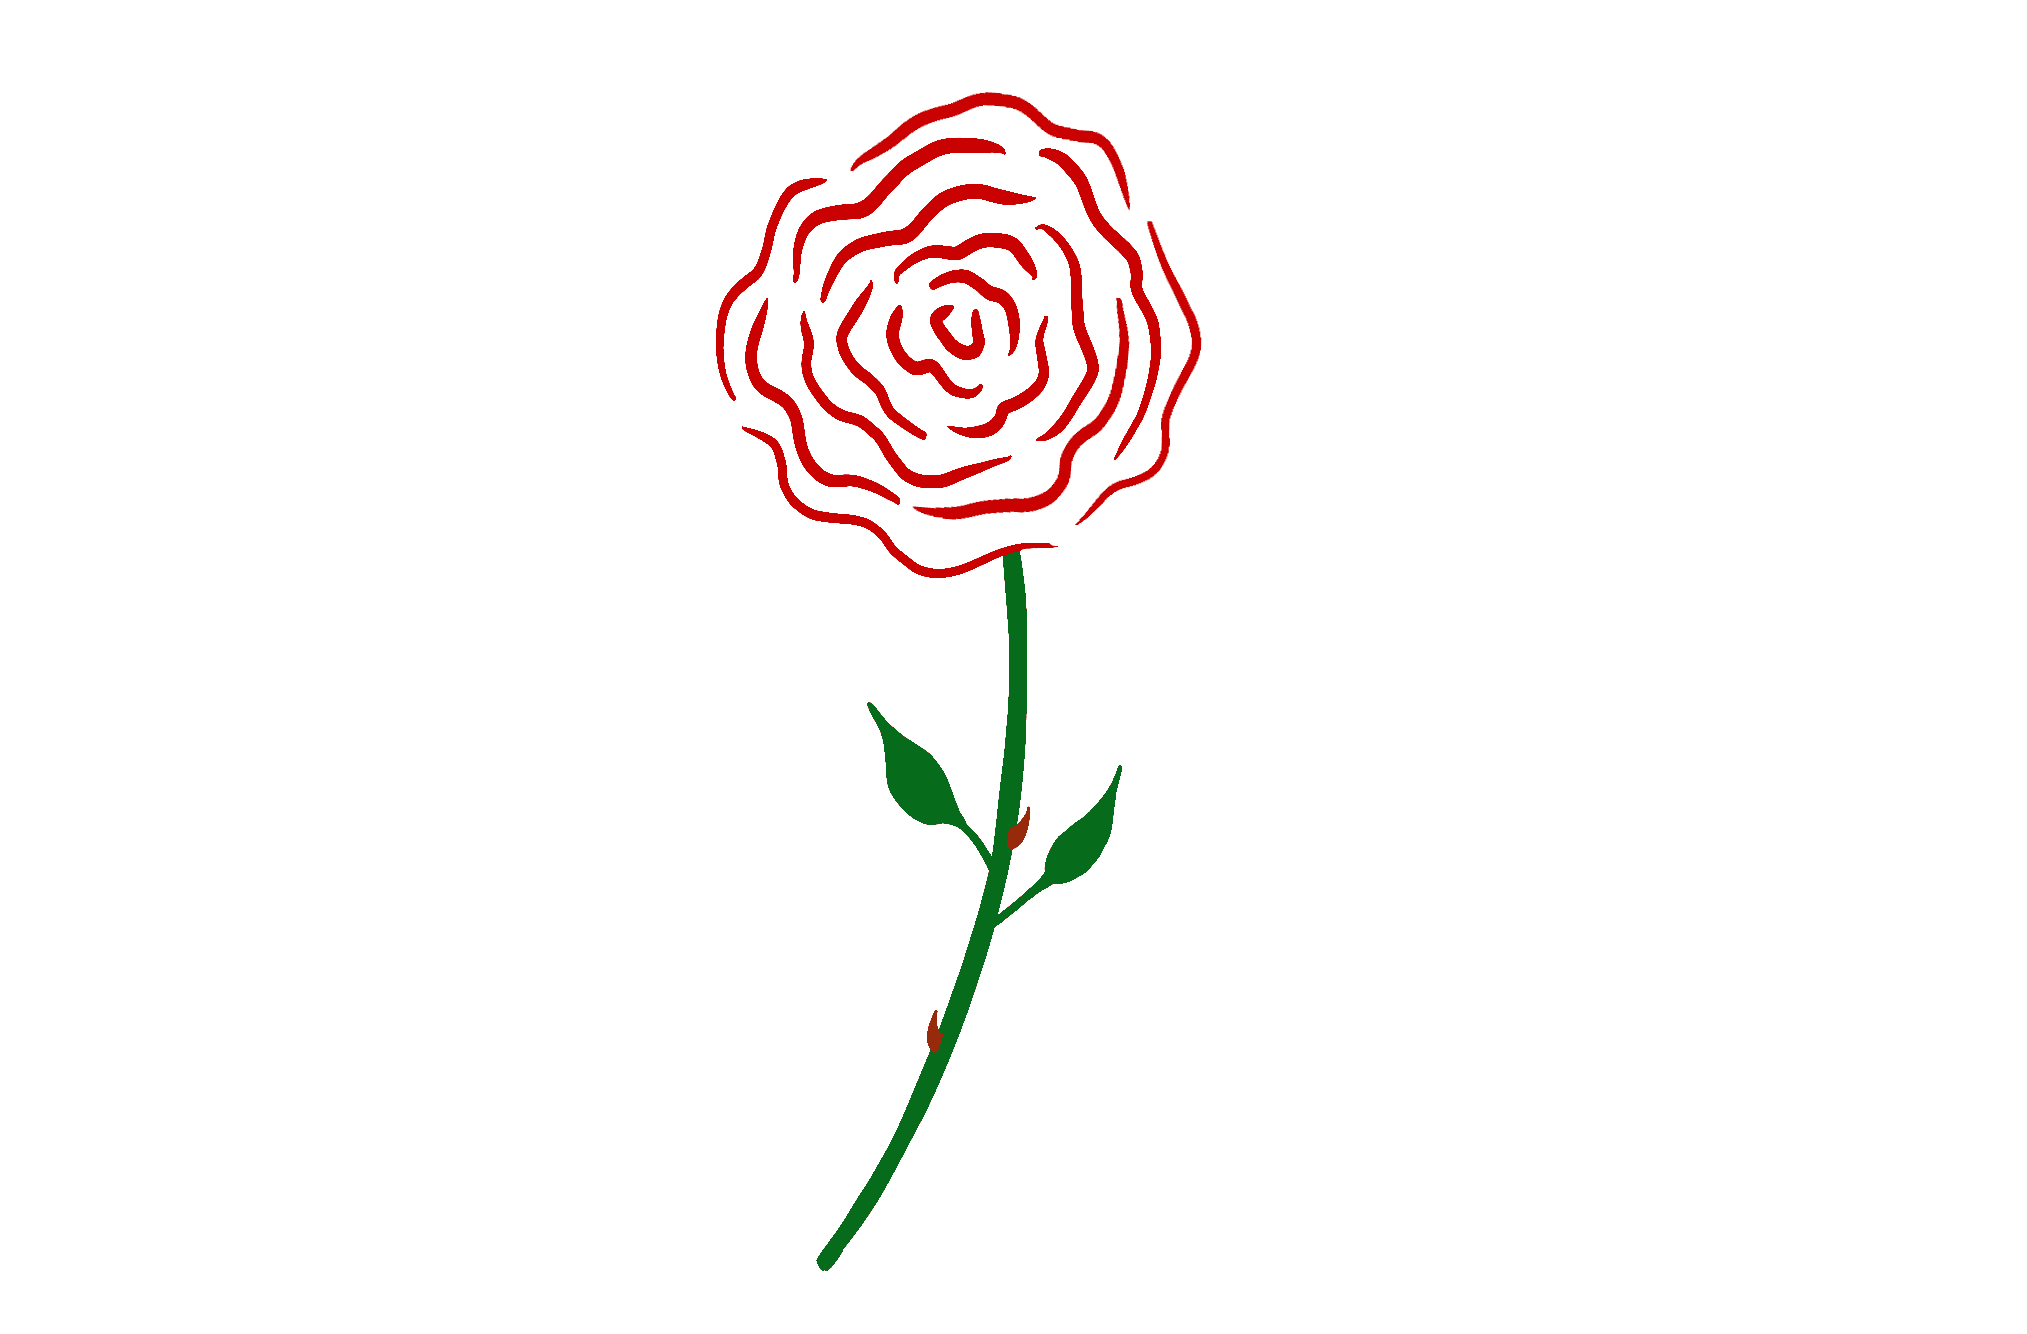 How to draw a rose easy tutorial for beginners || Rose drawing - YouTube-saigonsouth.com.vn